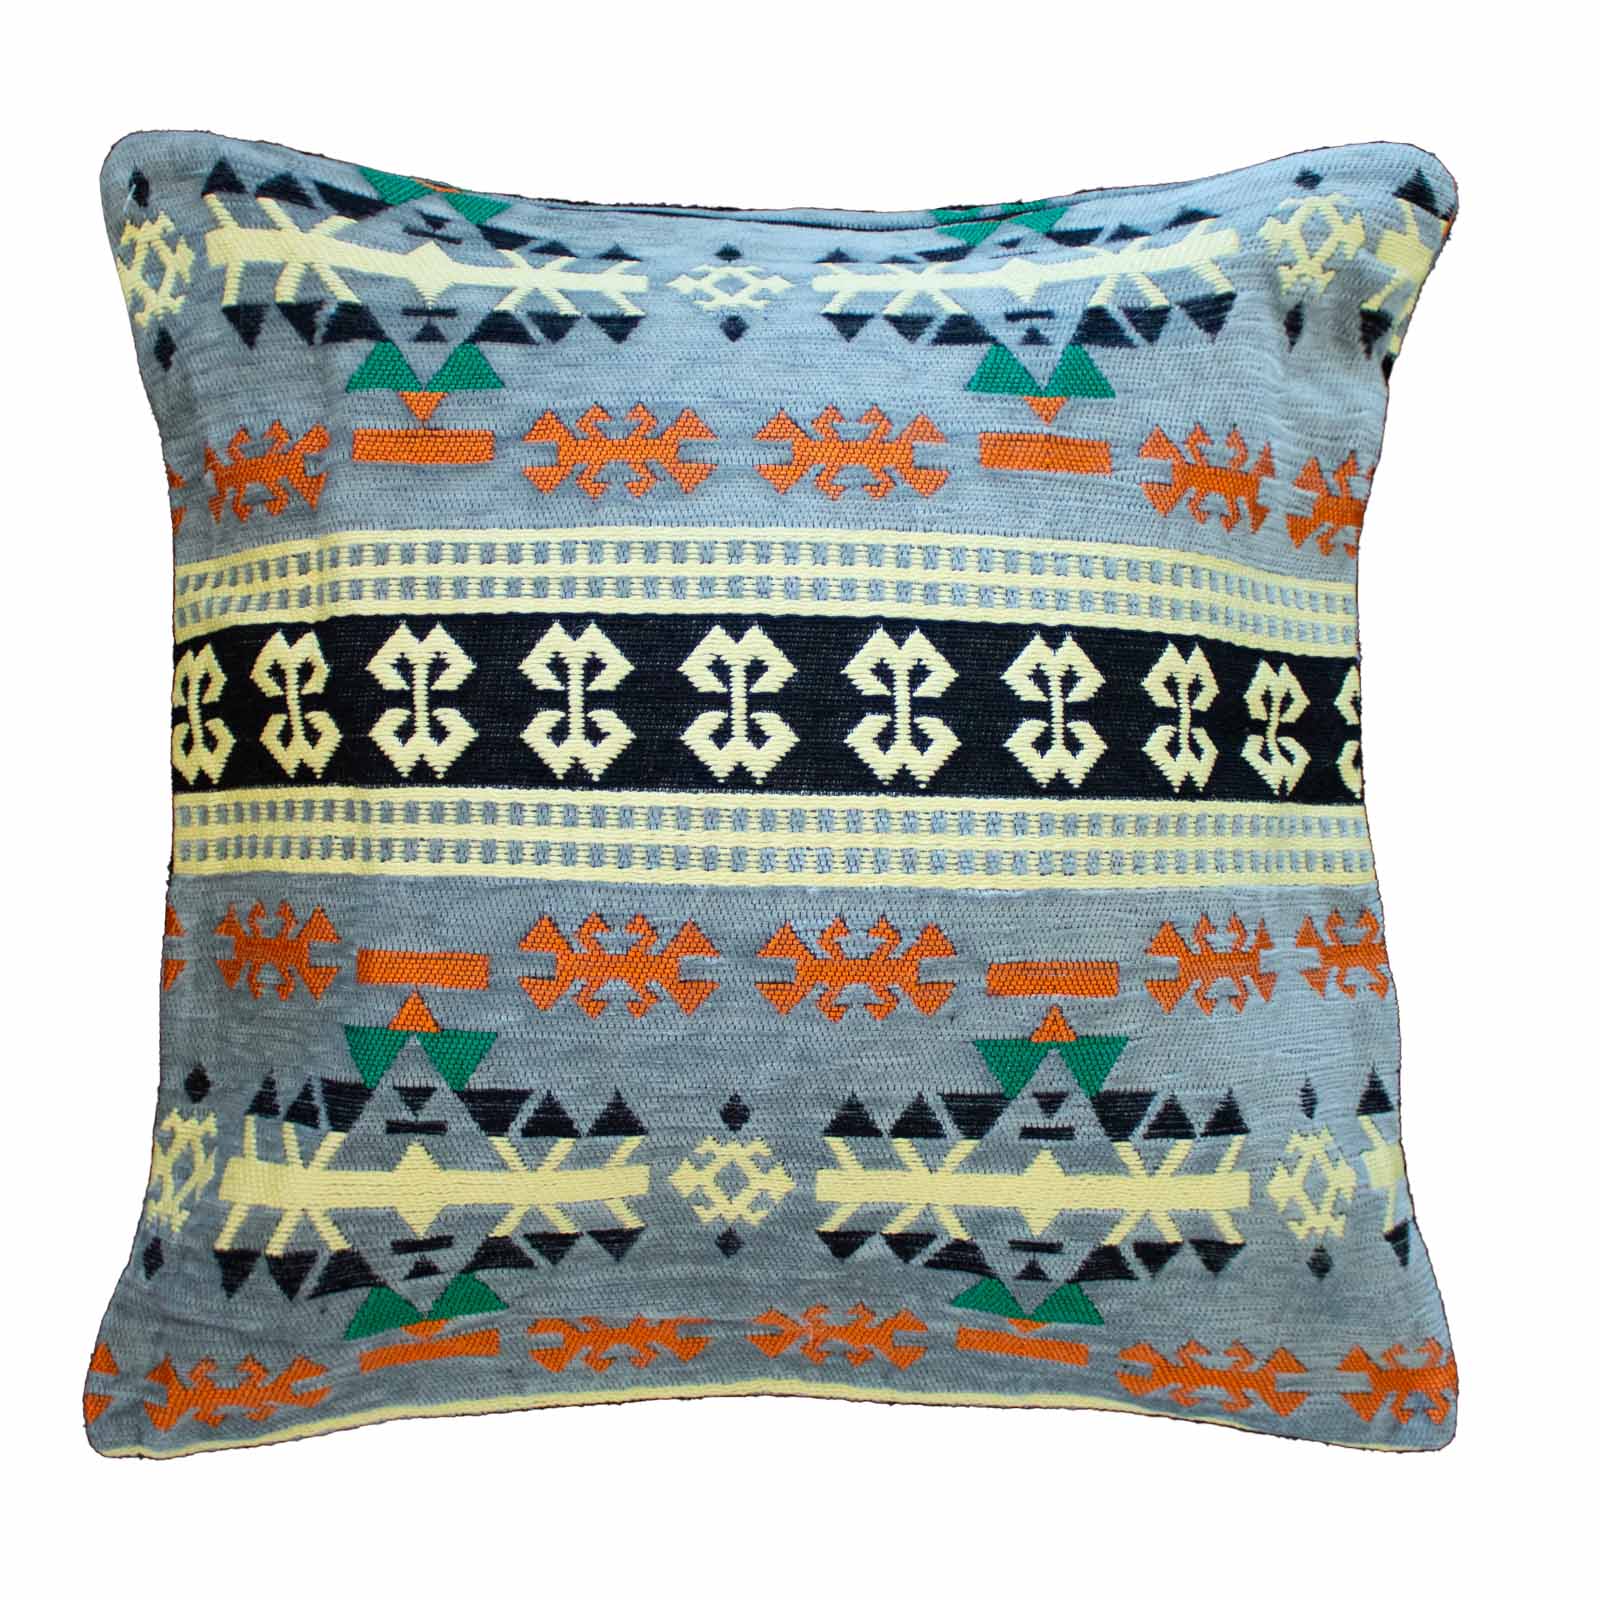 View Kilim Cushion Cover Charcoal information